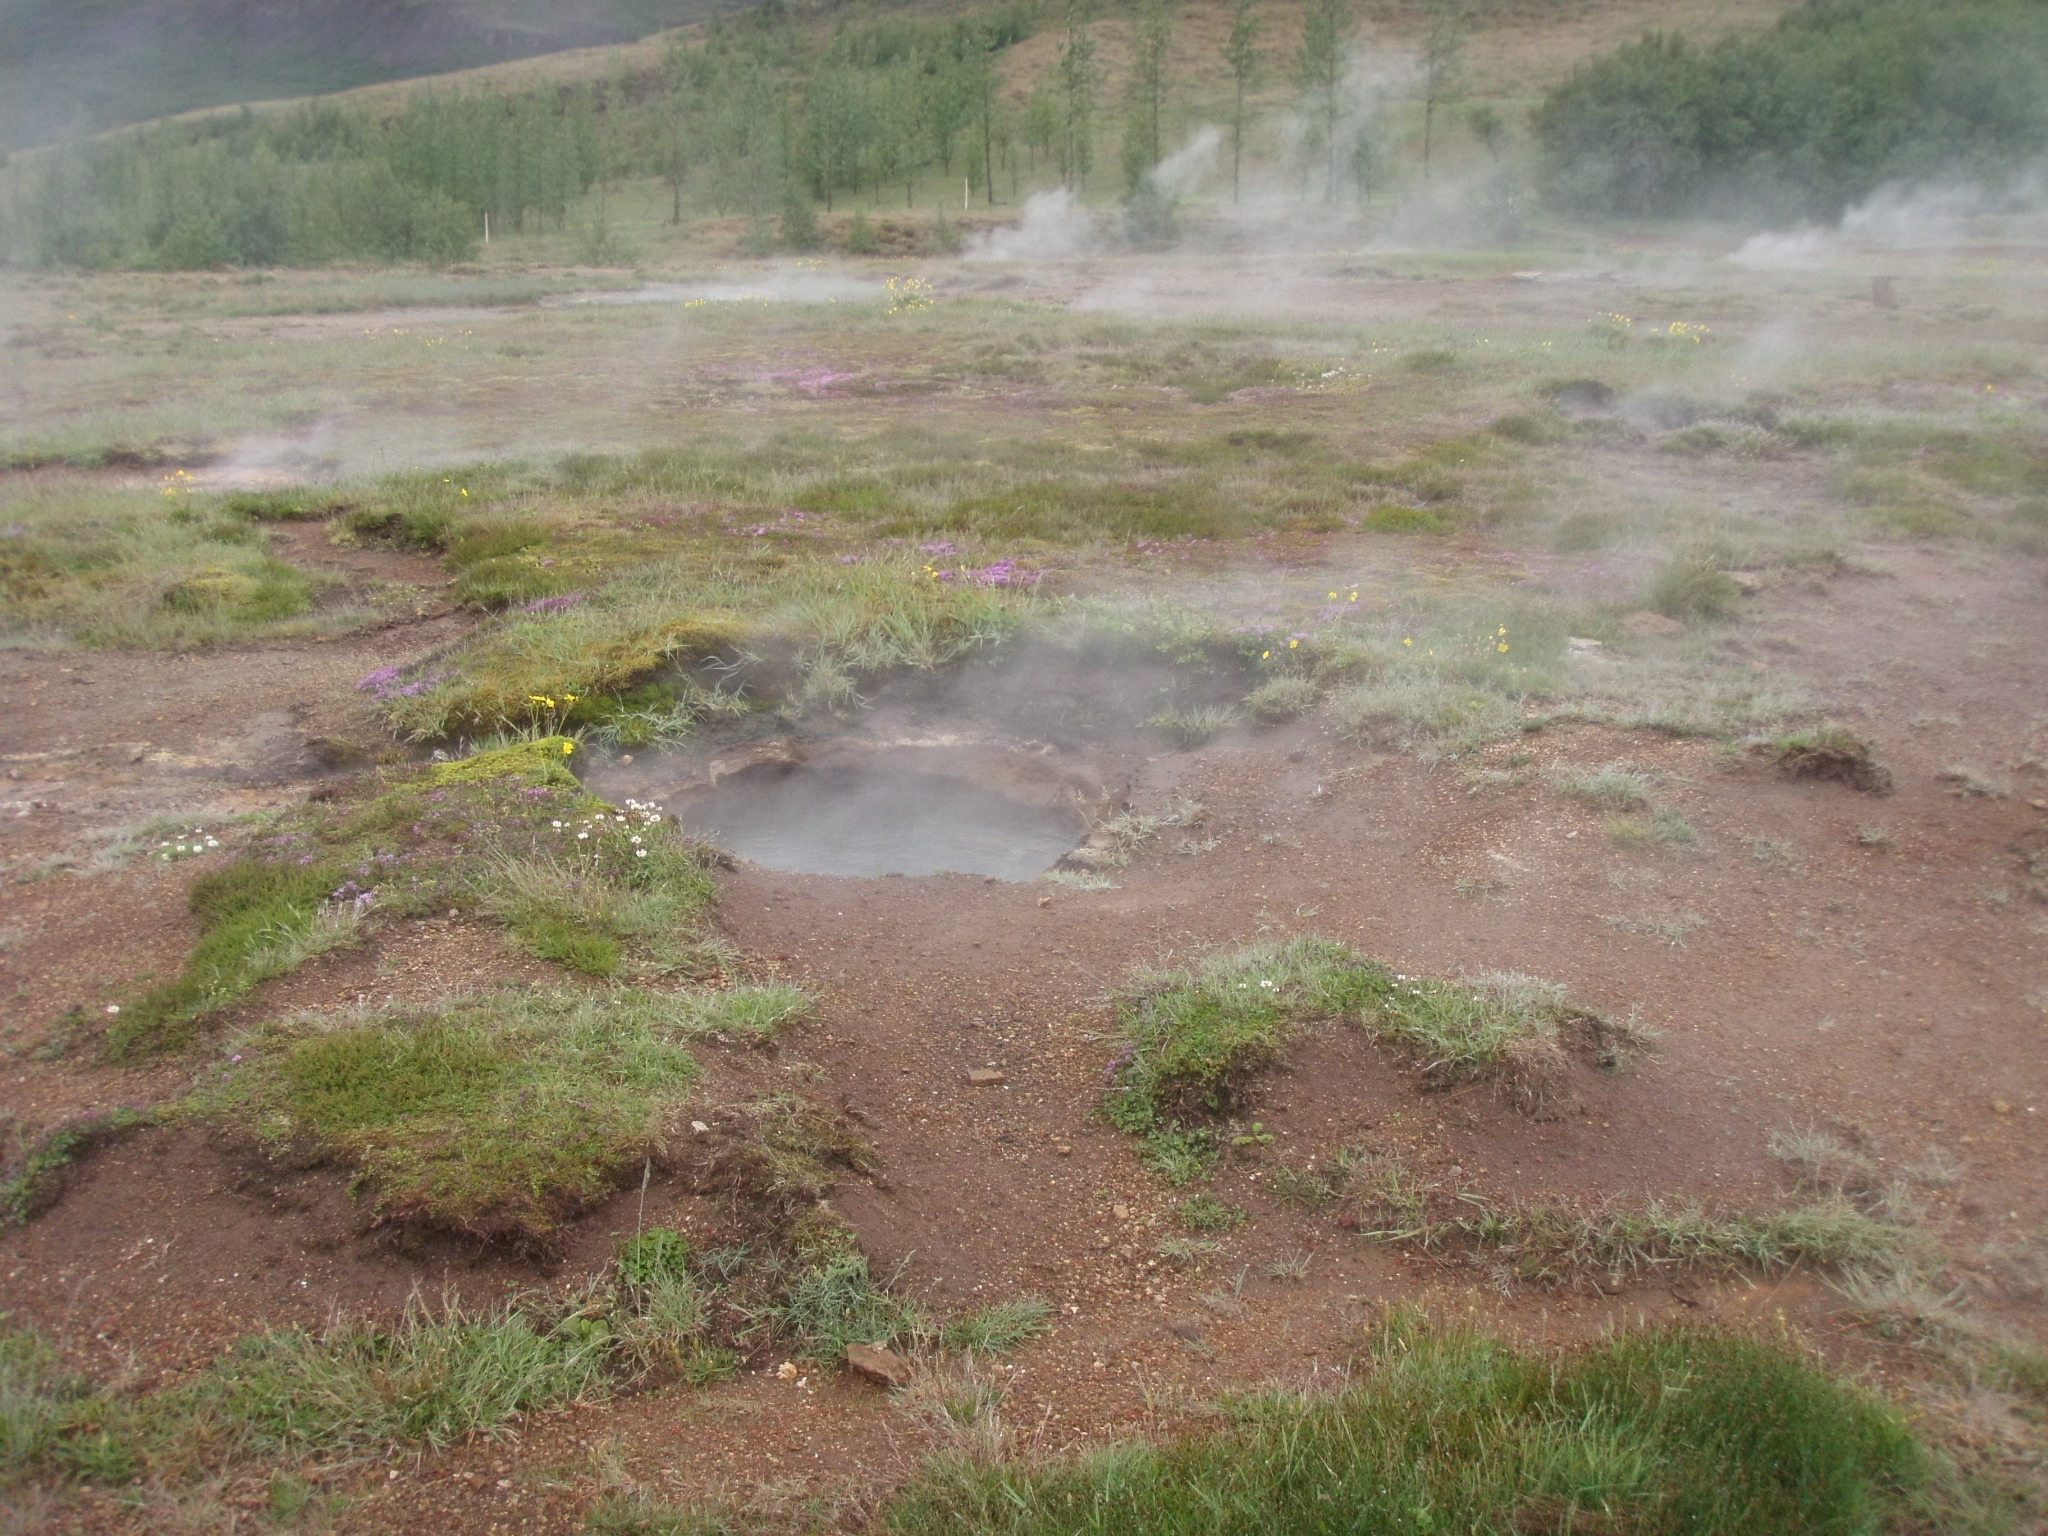 hot spring on ground near trees